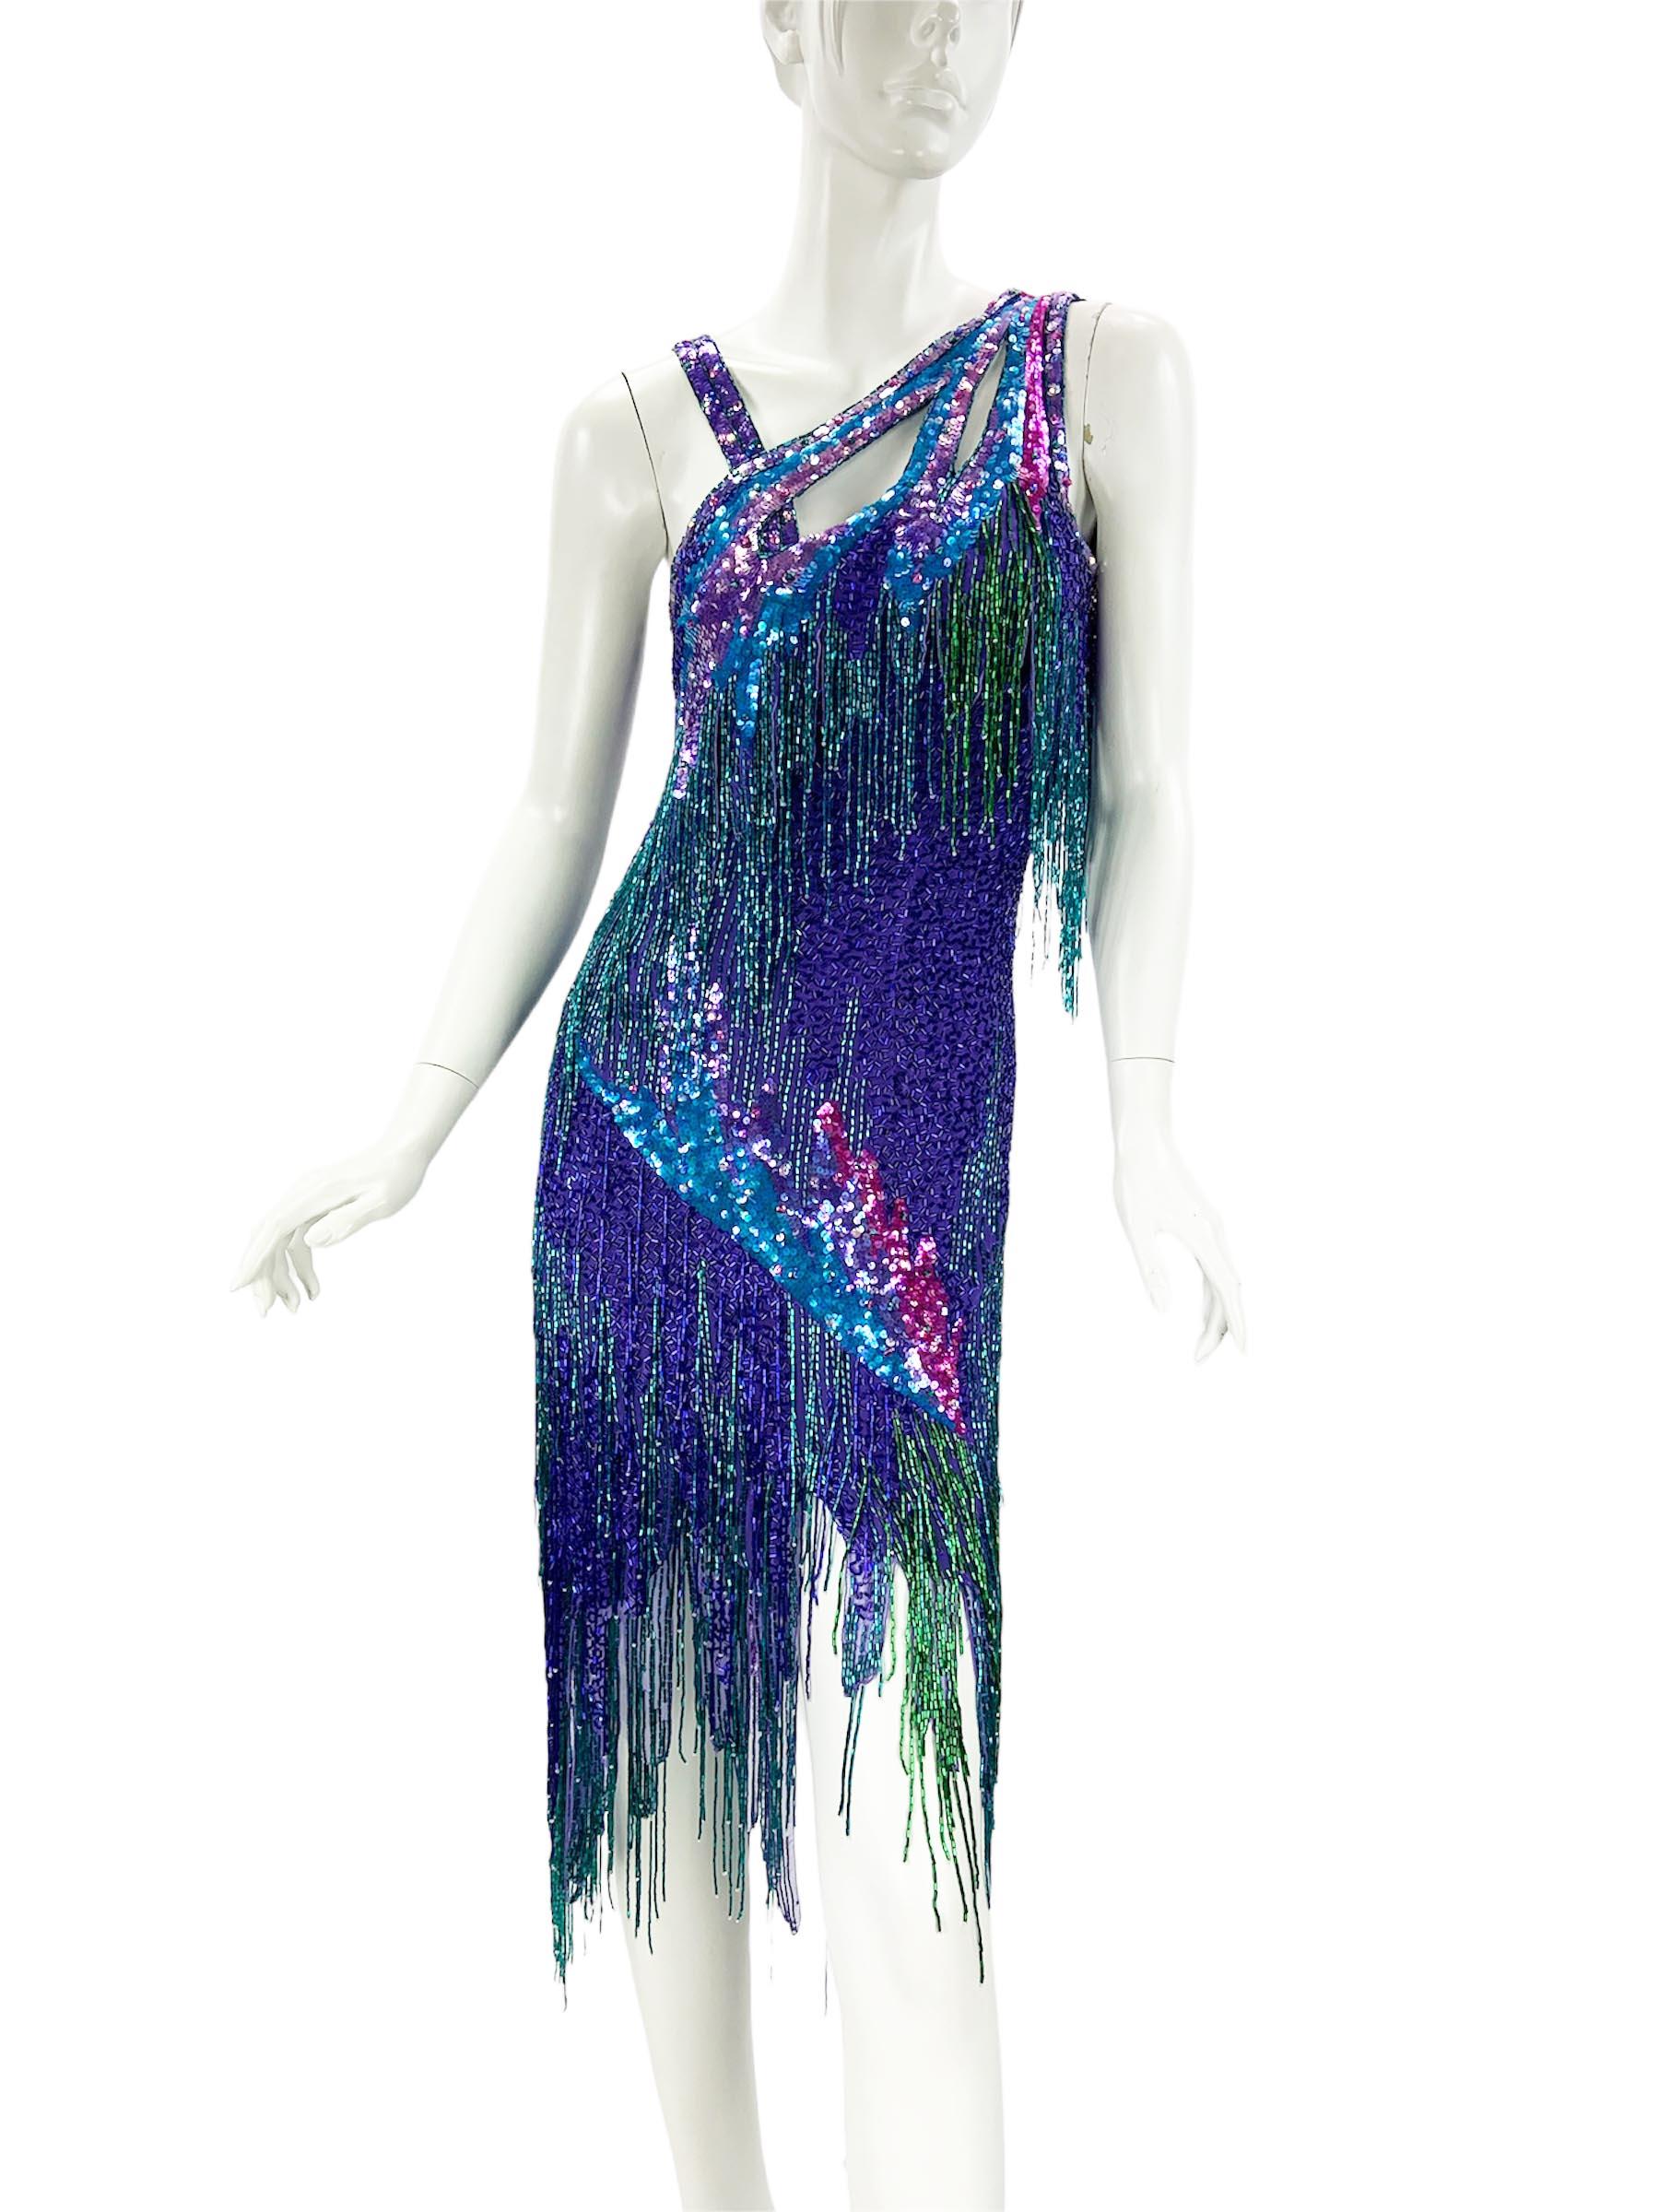 Bob Mackie for Amen Wardy Fully Embellished Evening Dress
1980's Collection
Dress was presented in Los Angeles County Museum of Art ( LACMA ).
Spectacular cocktail dress is made of purple silk that is covered in jewel-toned bugle beads that are sewn